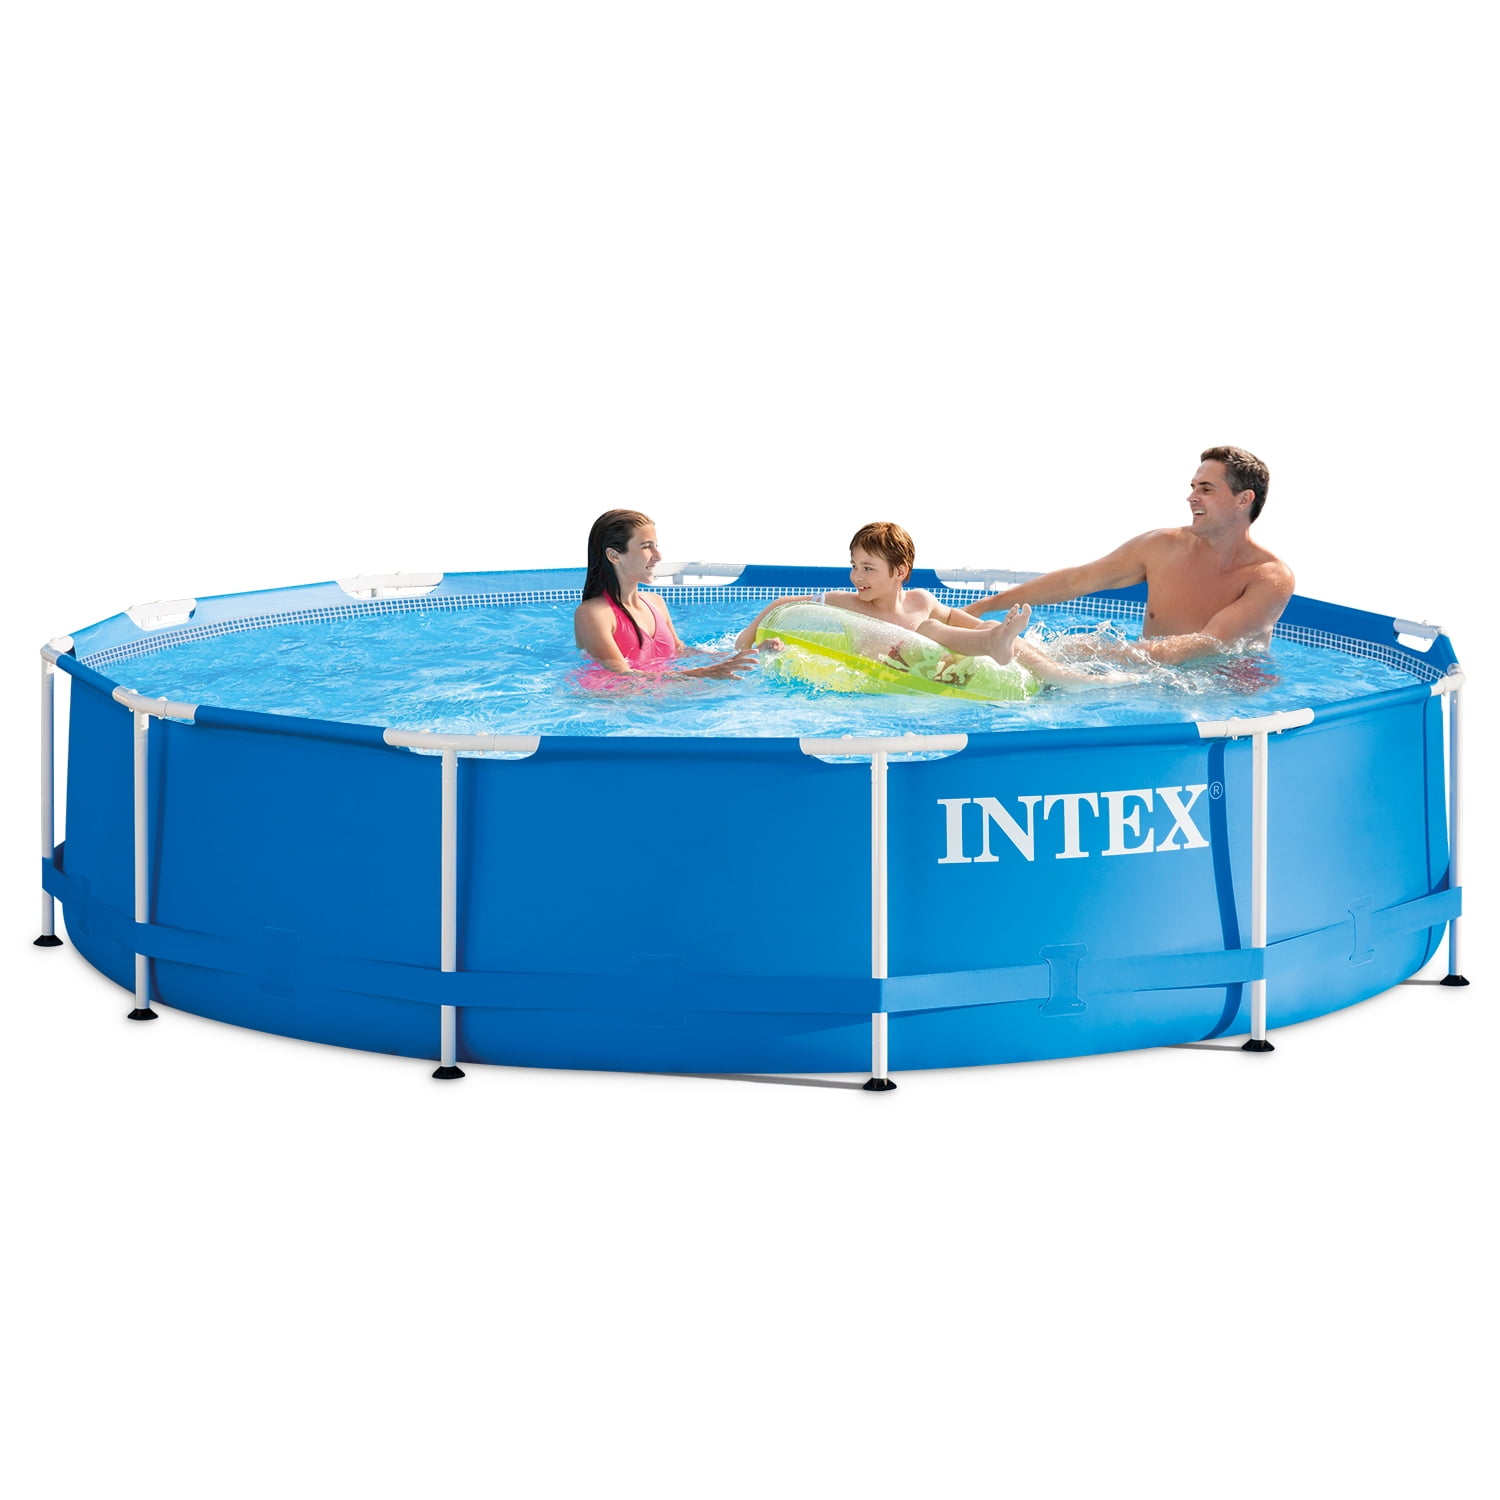 Unique Intex 12 X 39 Metal Frame Above Ground Swimming Pool for Simple Design